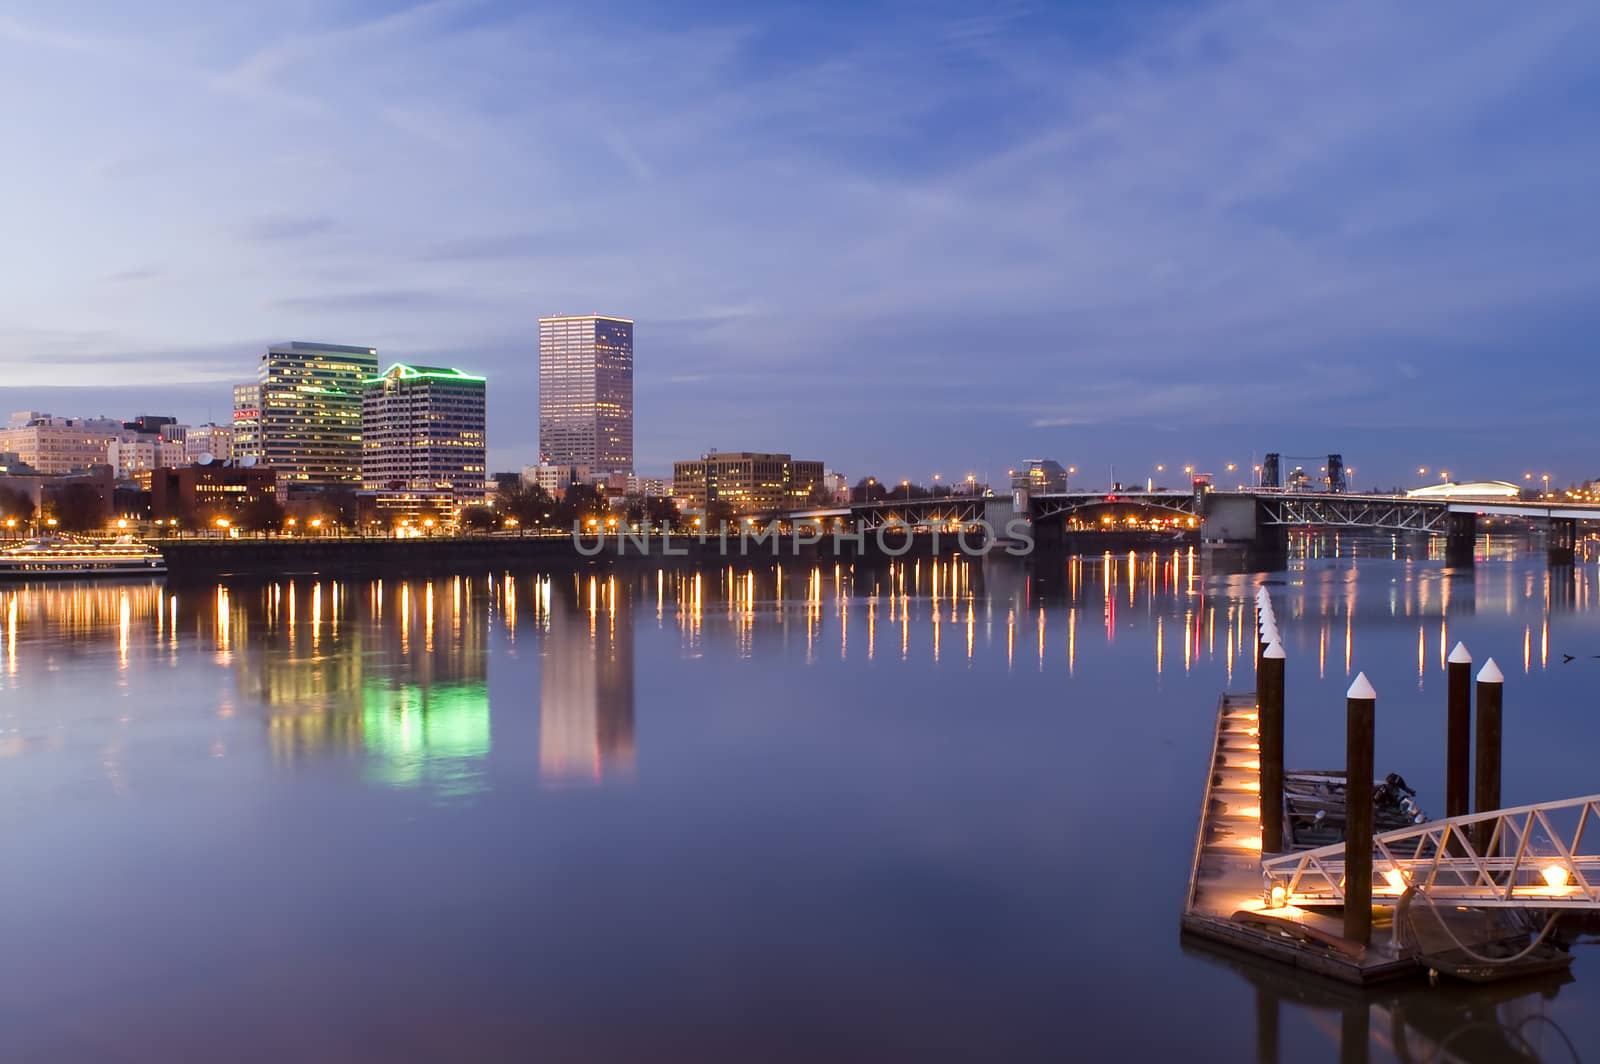 Portland, Oregon.  Night scene with light reflections on the Willamette River